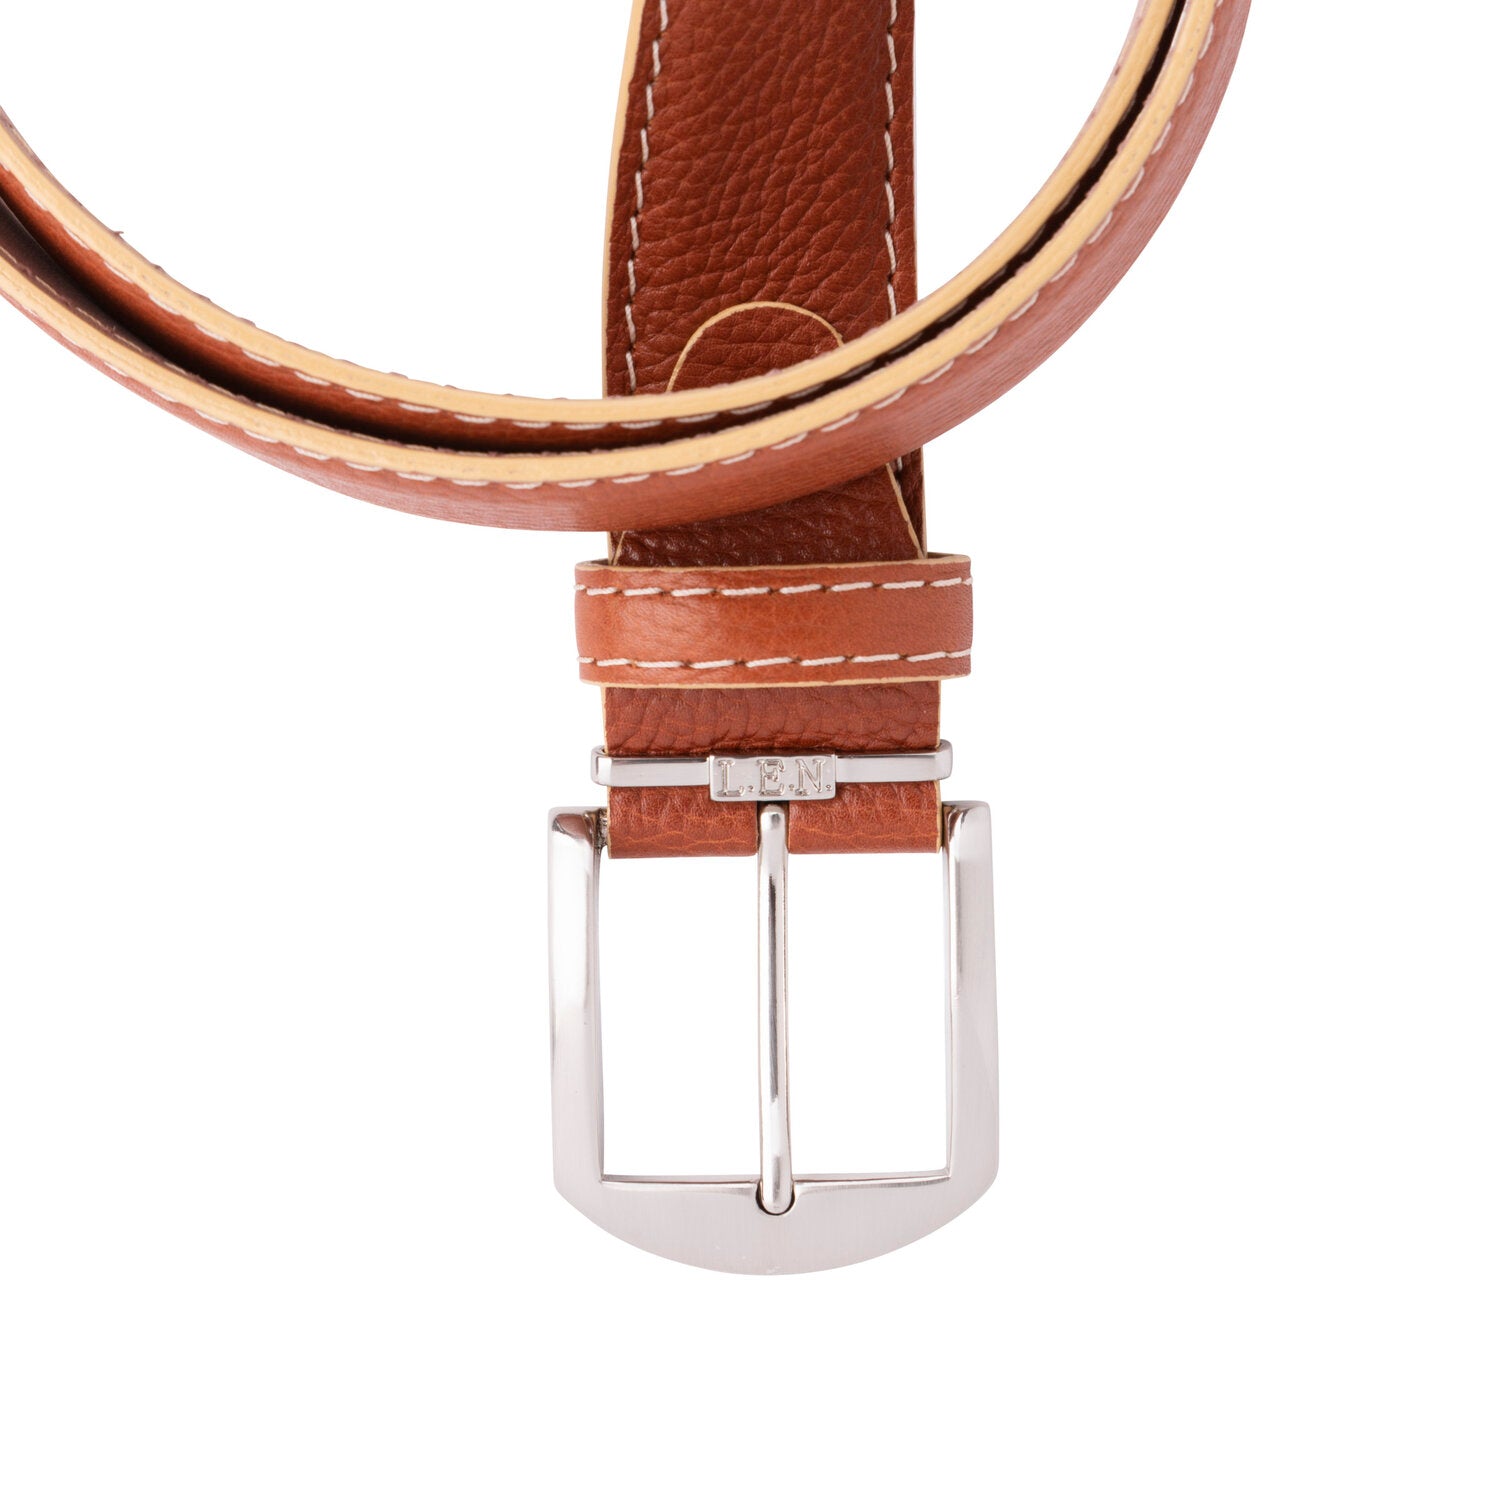 French Pebble Grain Calf Belt in Cognac with Beige Stitching by L.E.N. Bespoke